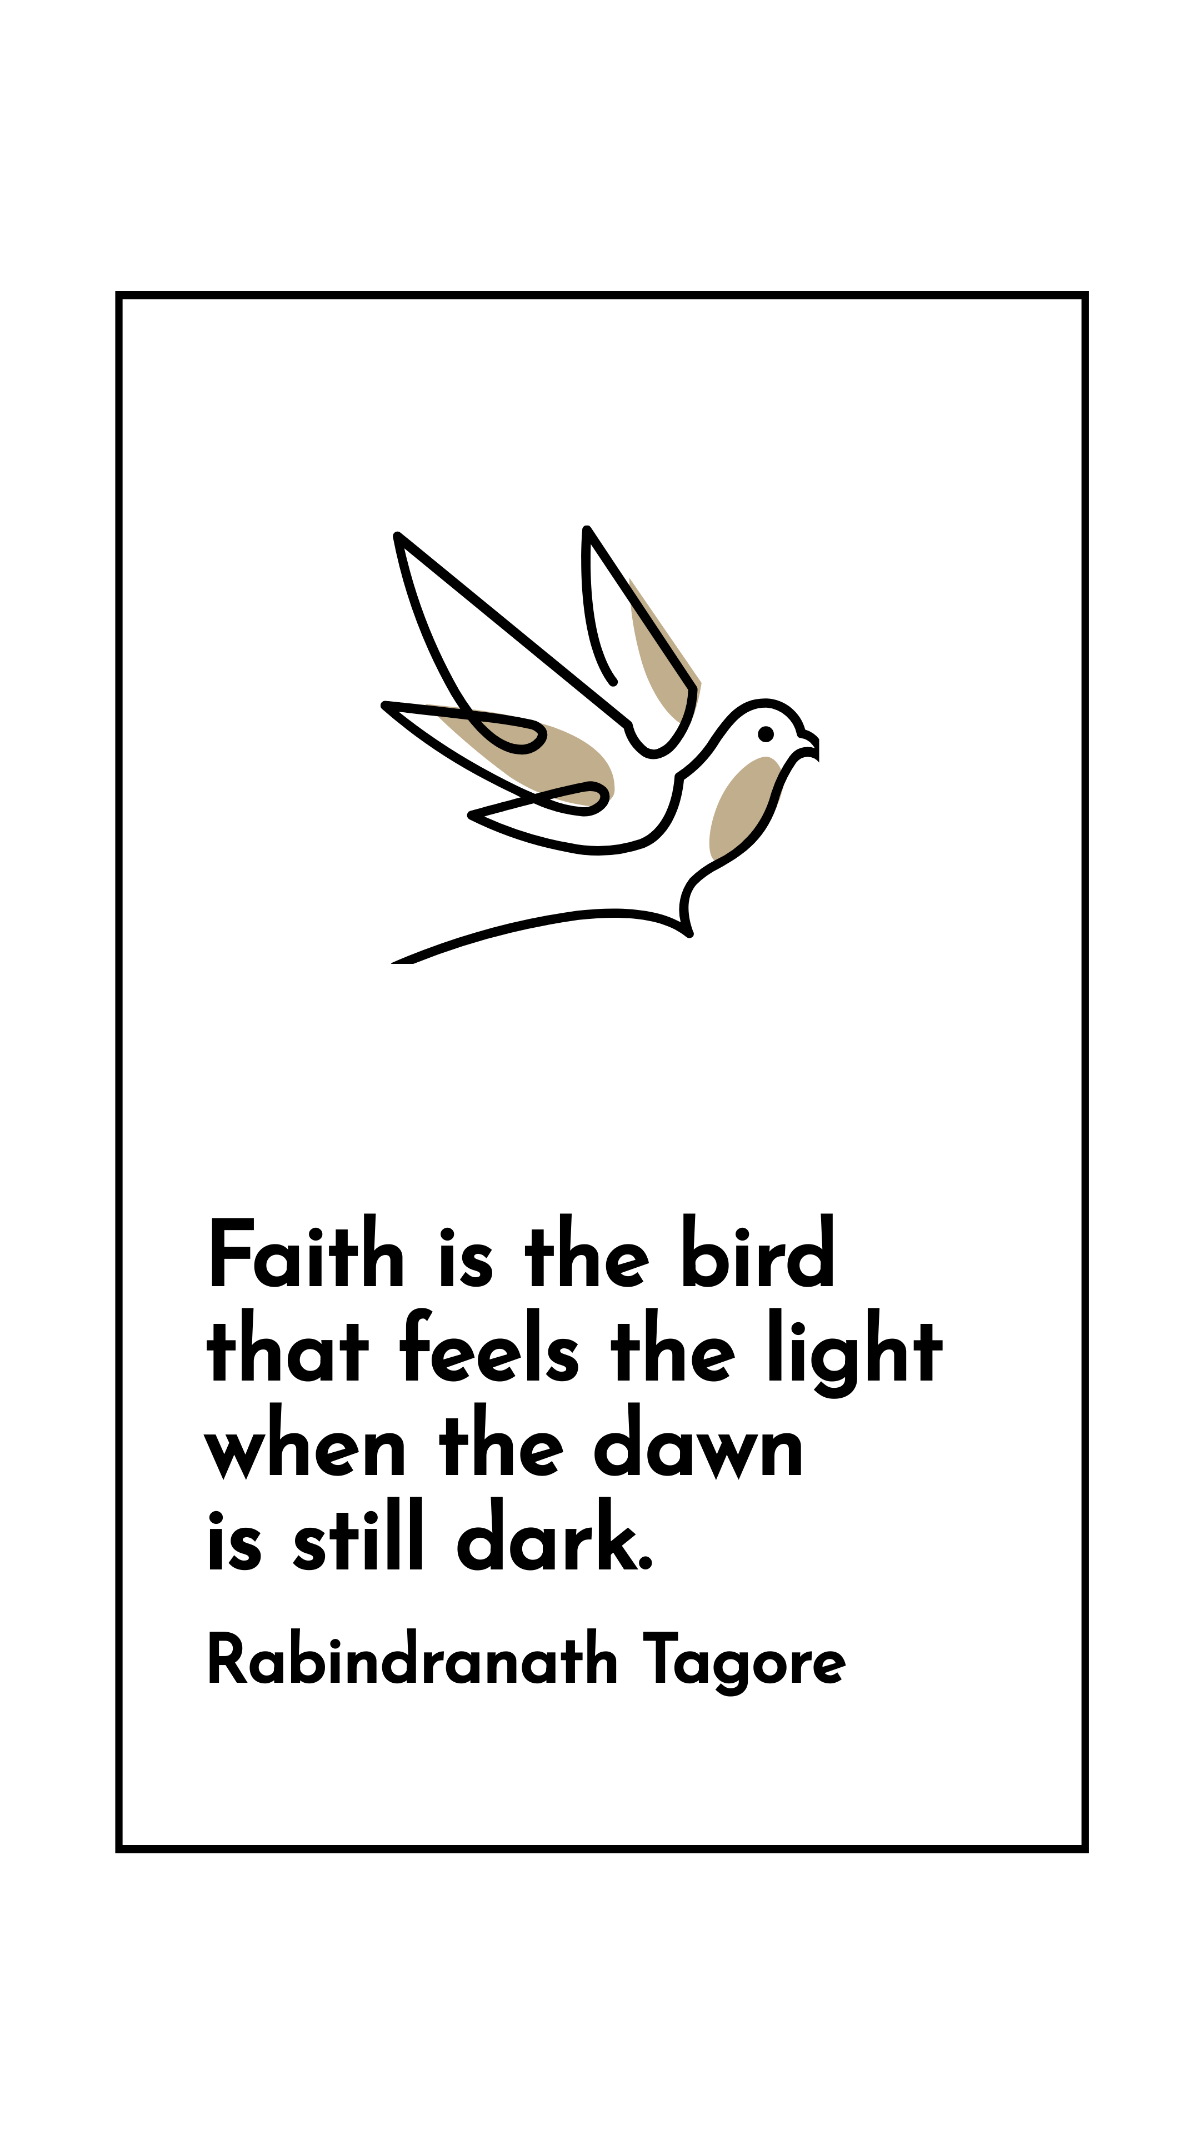 Free Rabindranath Tagore - Faith is the bird that feels the light when the dawn is still dark. Template